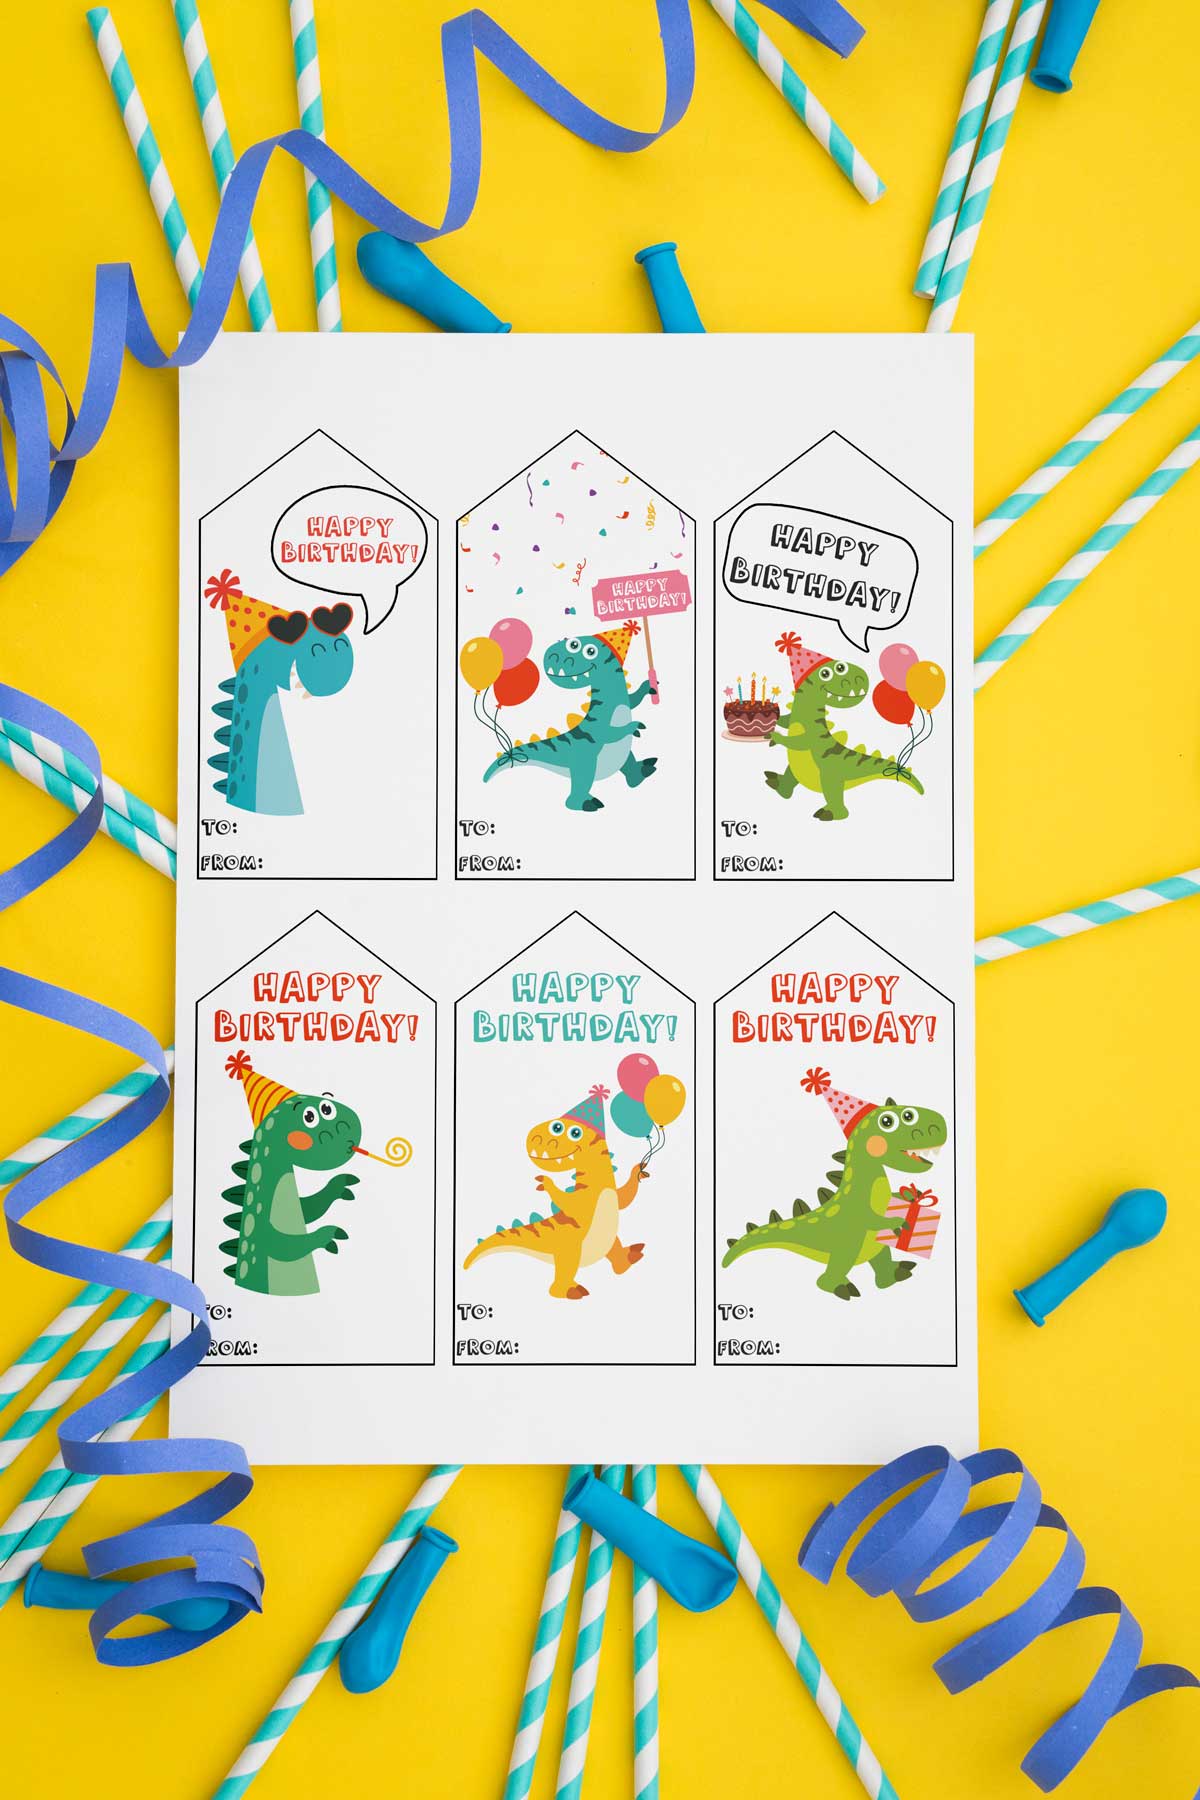 This image is showing one of the free printable birthday tags set - each tag has a different dinosaur and the words Happy Birthday.